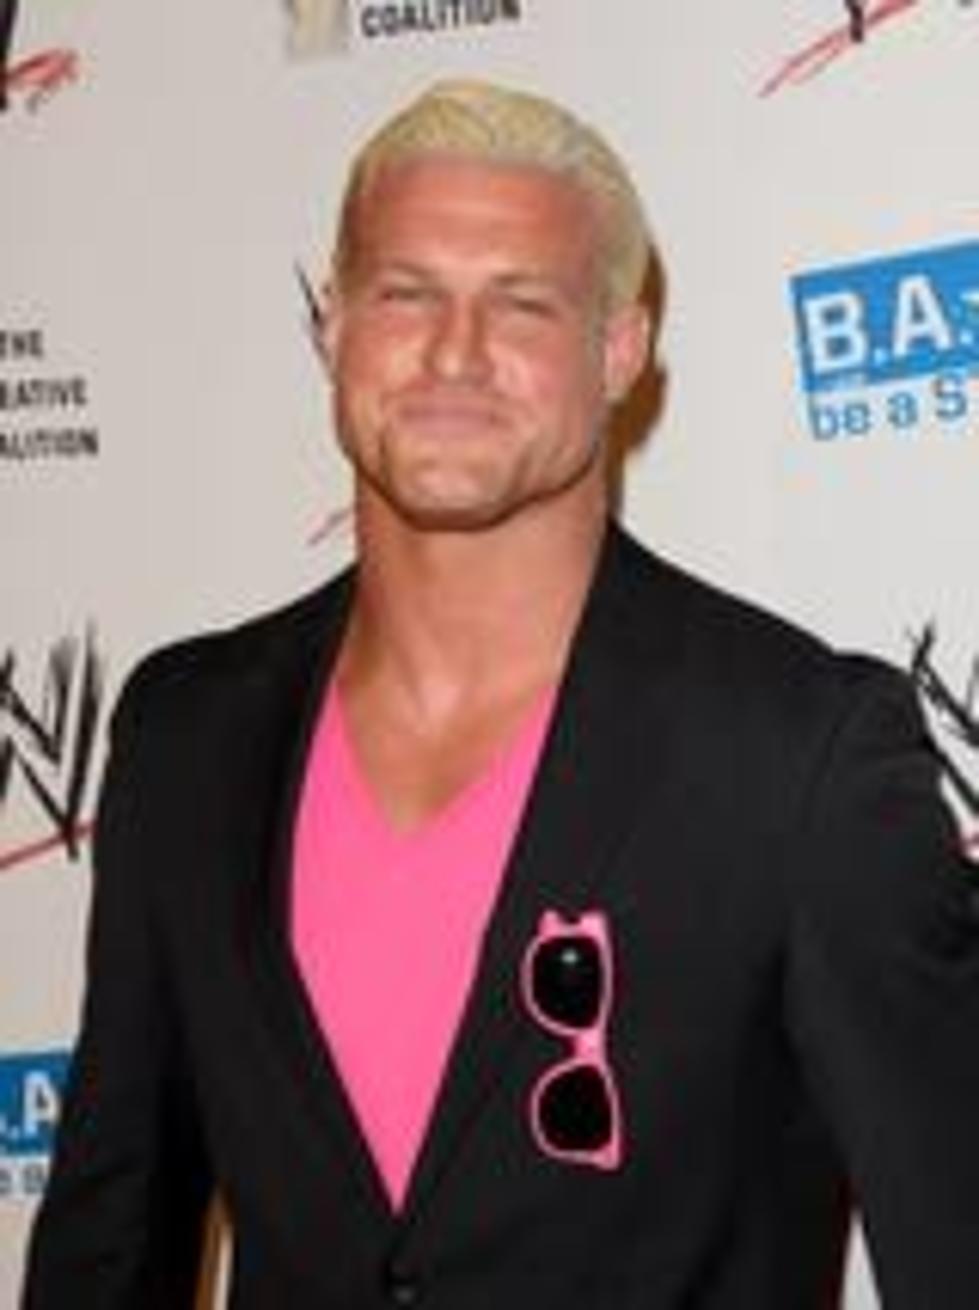 ON DEMAND: Dolph Ziggler on the Business of Wrestling, Plus Buy This Book